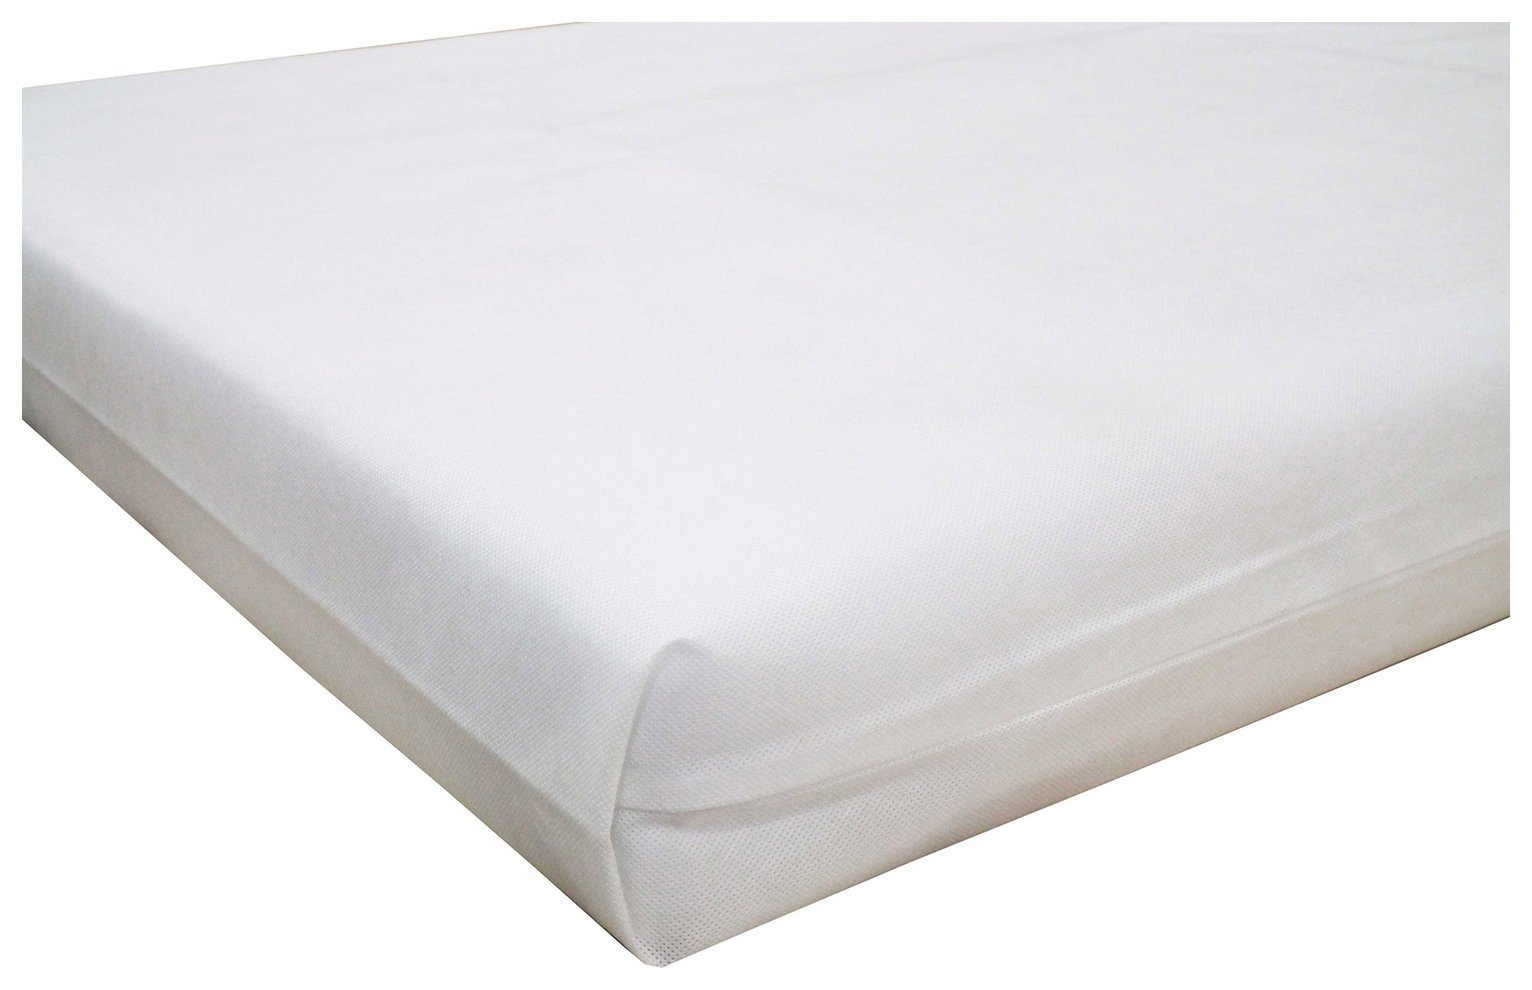 are travel cot mattresses a standard size